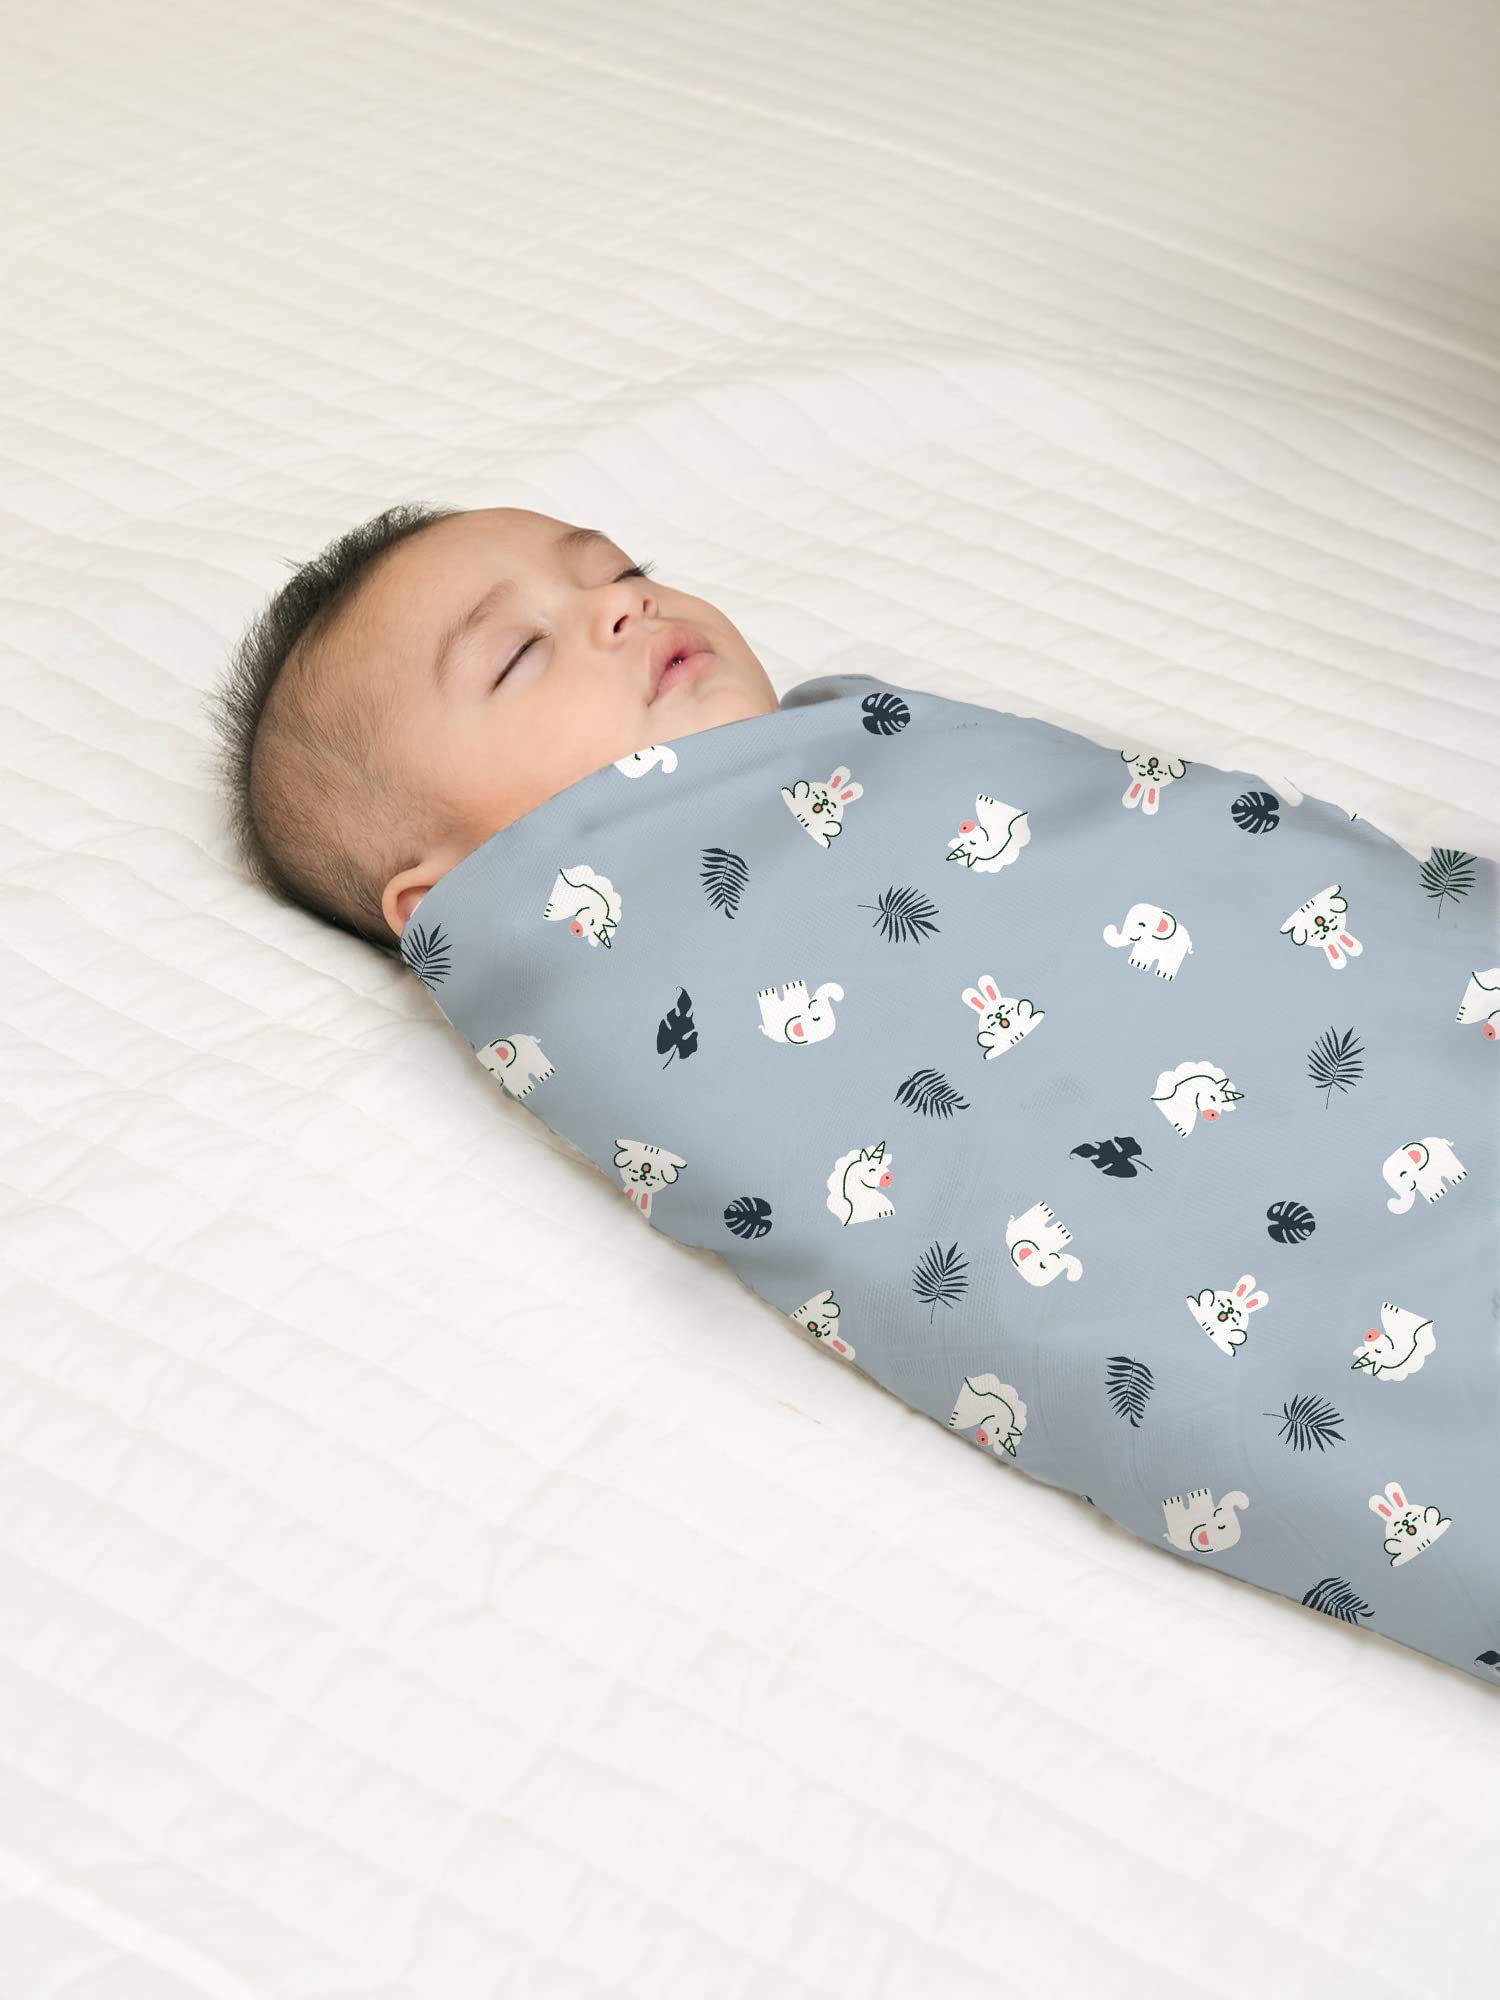 Mush 100% Bamboo Swaddle : Ultra Soft, Breathable, Thermoregulating, Absorbent, Light Weight and Multipurpose Bamboo Wrapper/Baby Bath Towel/Blanket (3, Sea Grey,Rabbit Blue - Geo Mustard)